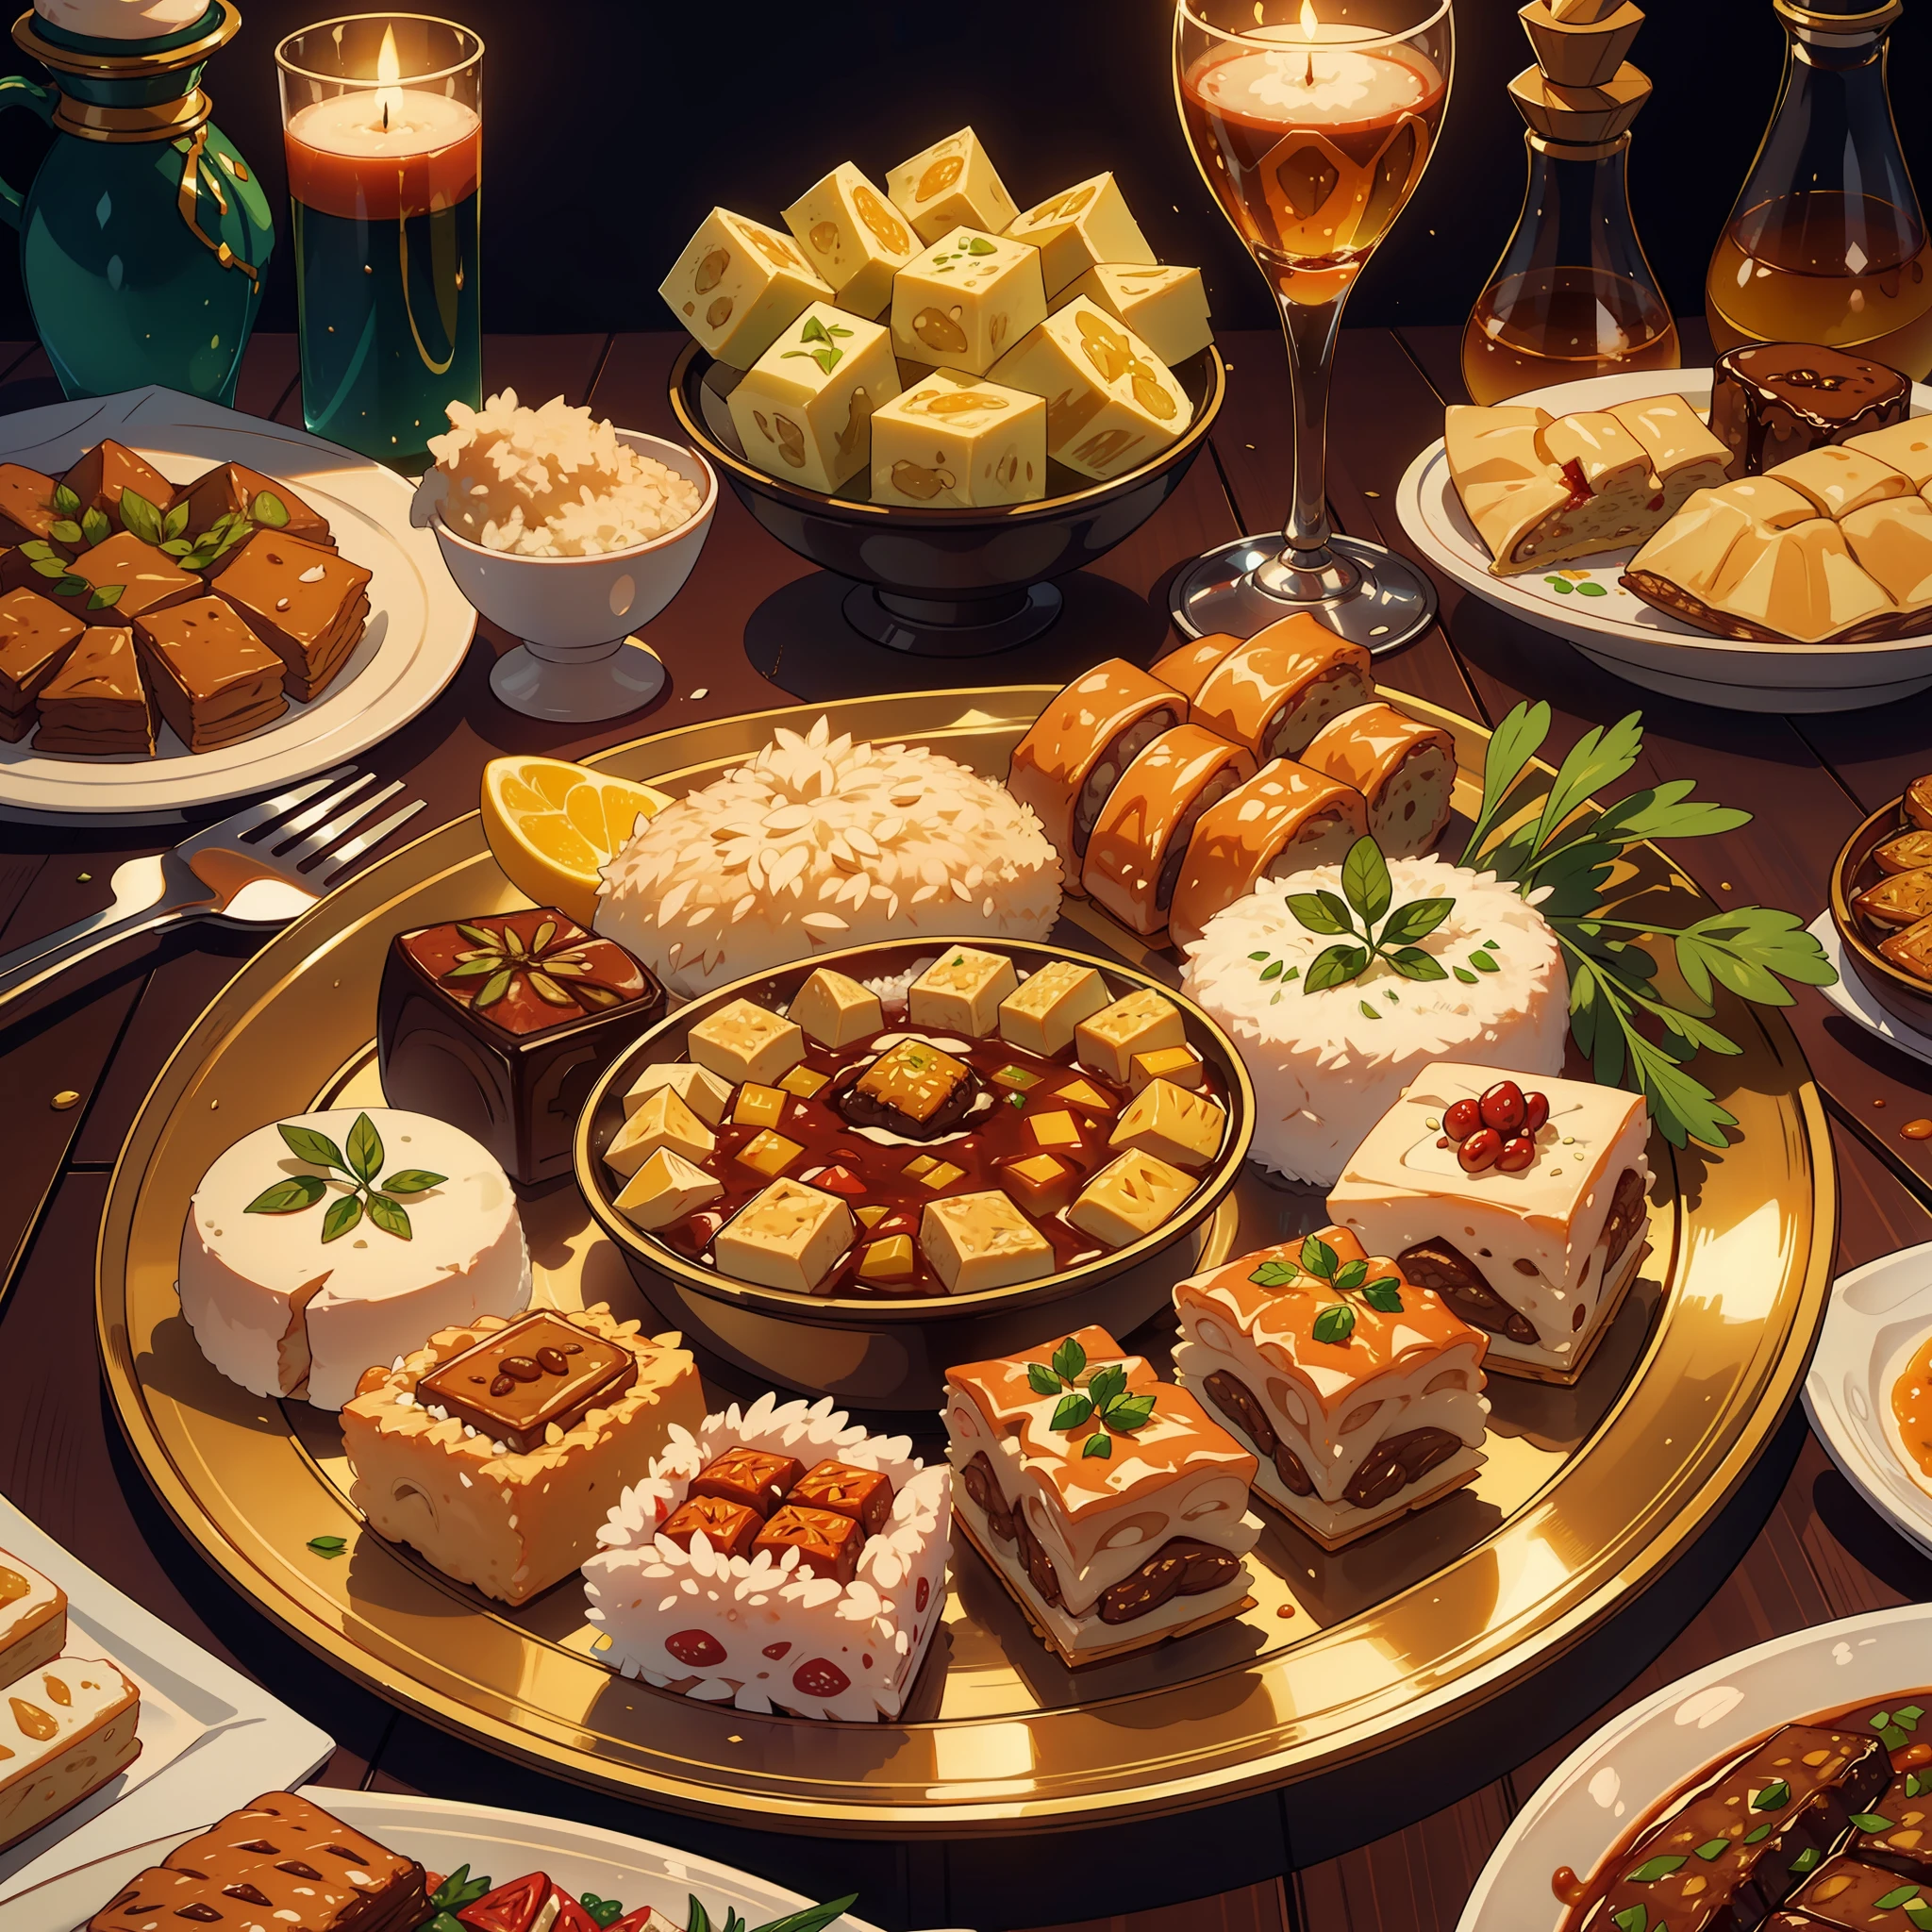 Create a mouthwatering visual feast showcasing a luxurious assortment of Eid delicacies, featuring tantalizing lamb or goat delicacies, fragrant rice dishes, and a tempting selection of sweets such as baklava and ma'amoul.